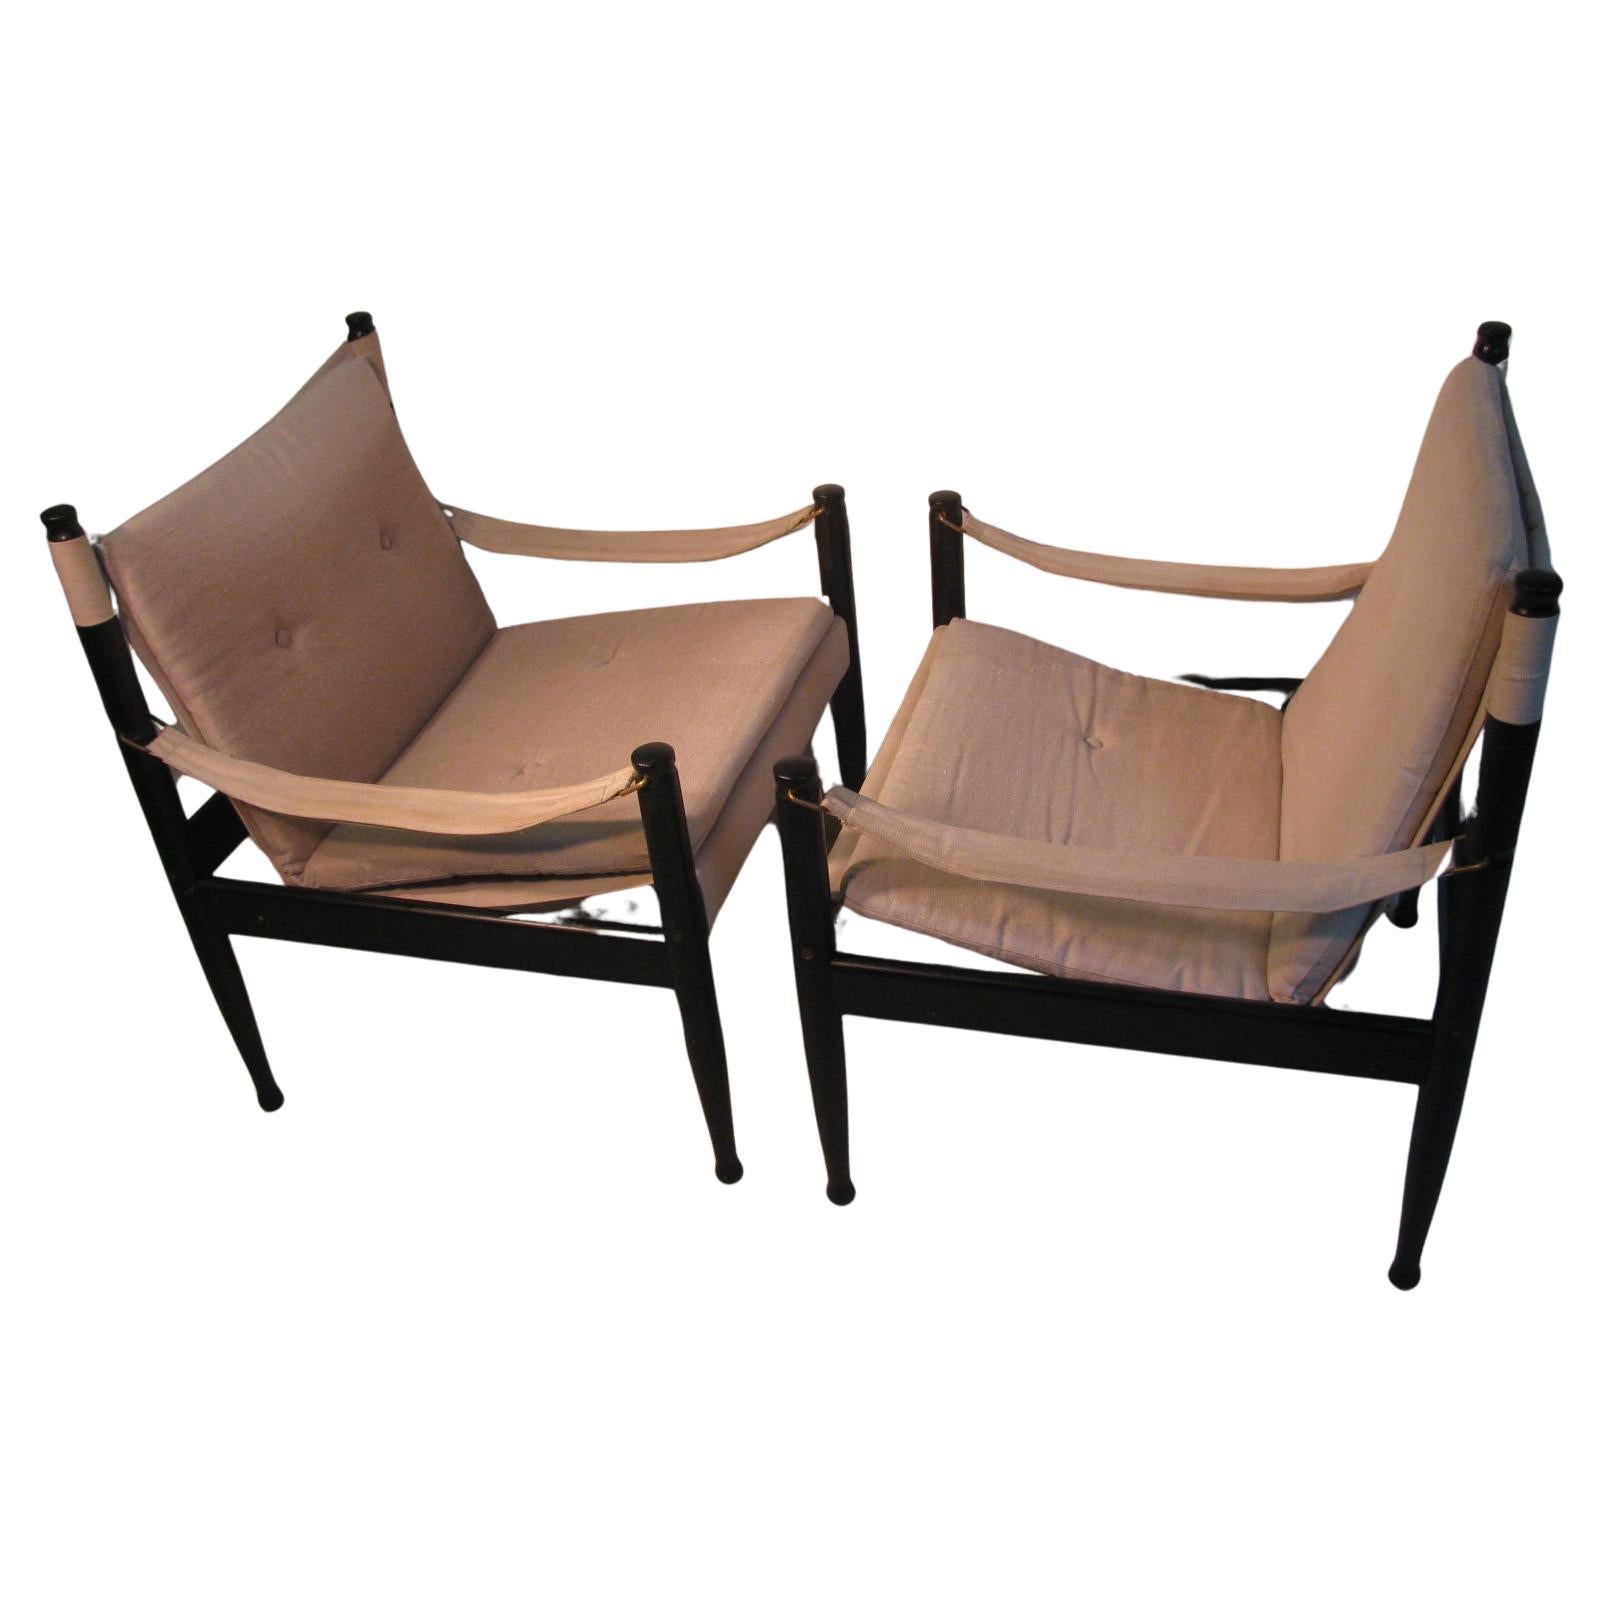 Woven Pair of Mid-Century Modern Danish Safari Campaign Lounge Chairs by Erik Worts For Sale